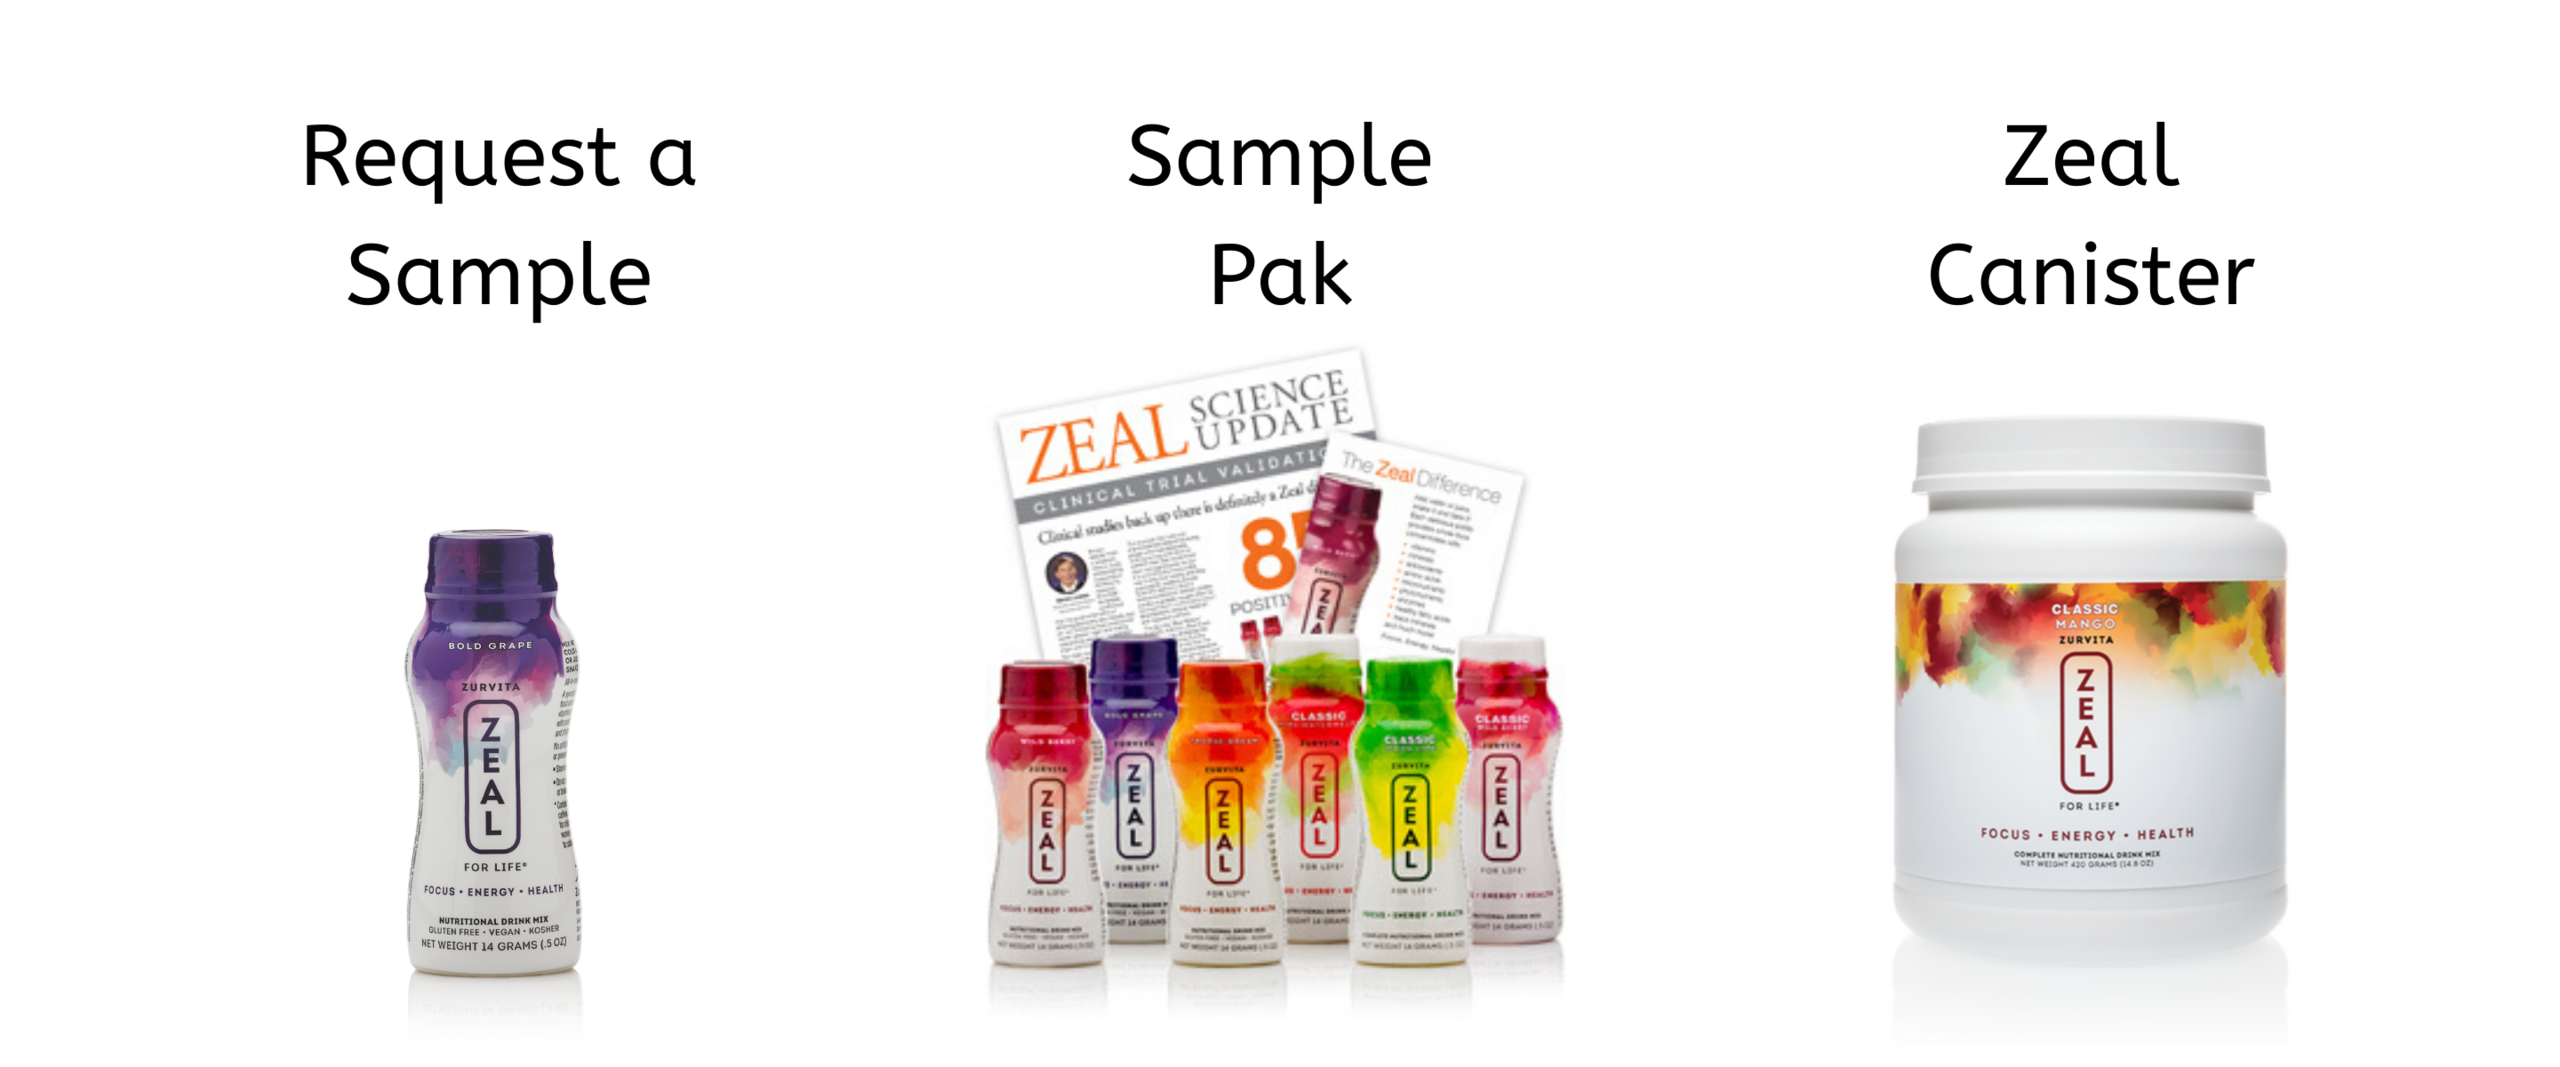 Request a Zeal sample